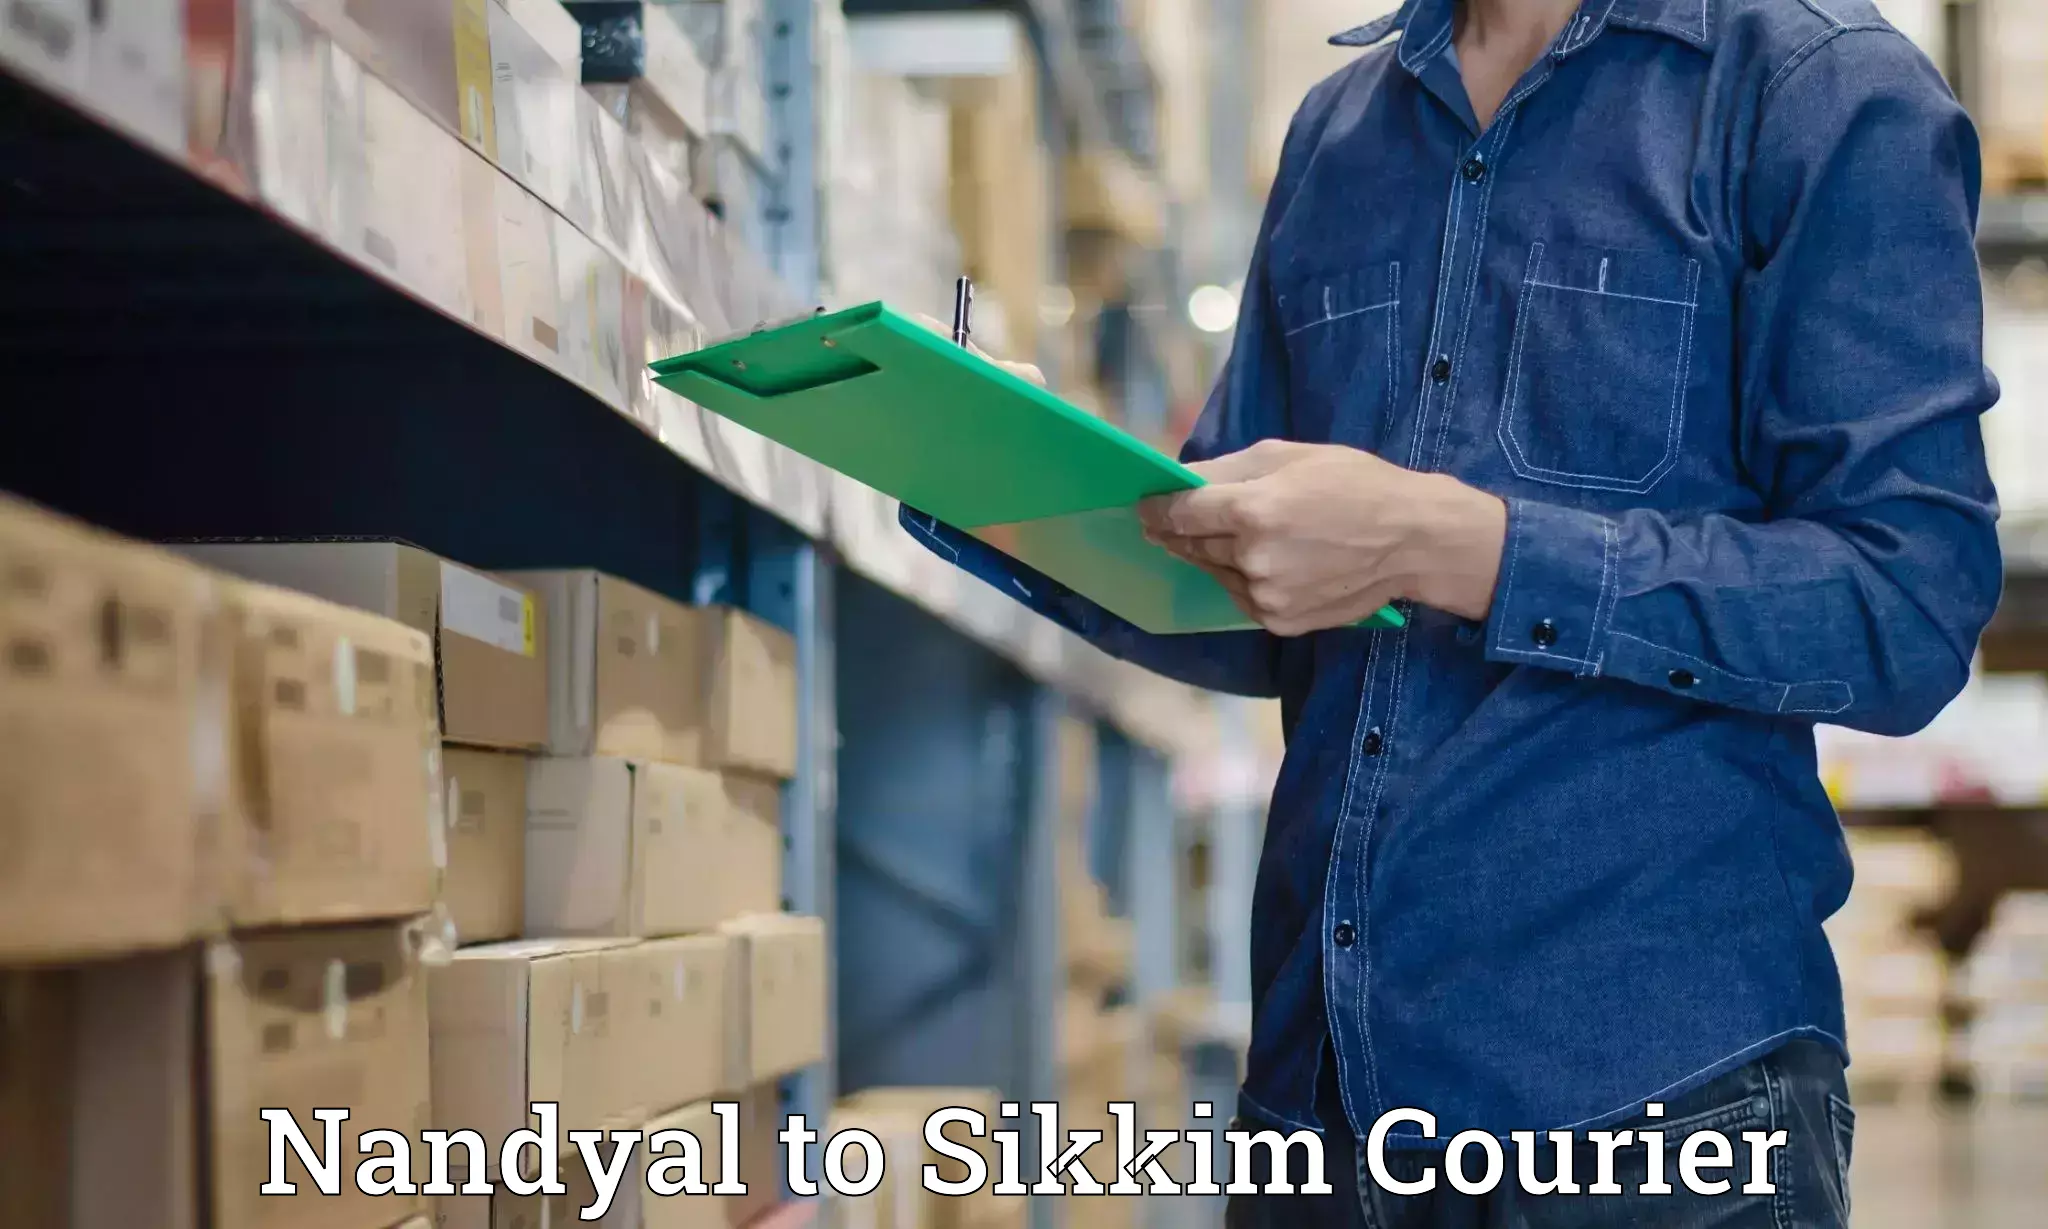 State-of-the-art courier technology Nandyal to Sikkim